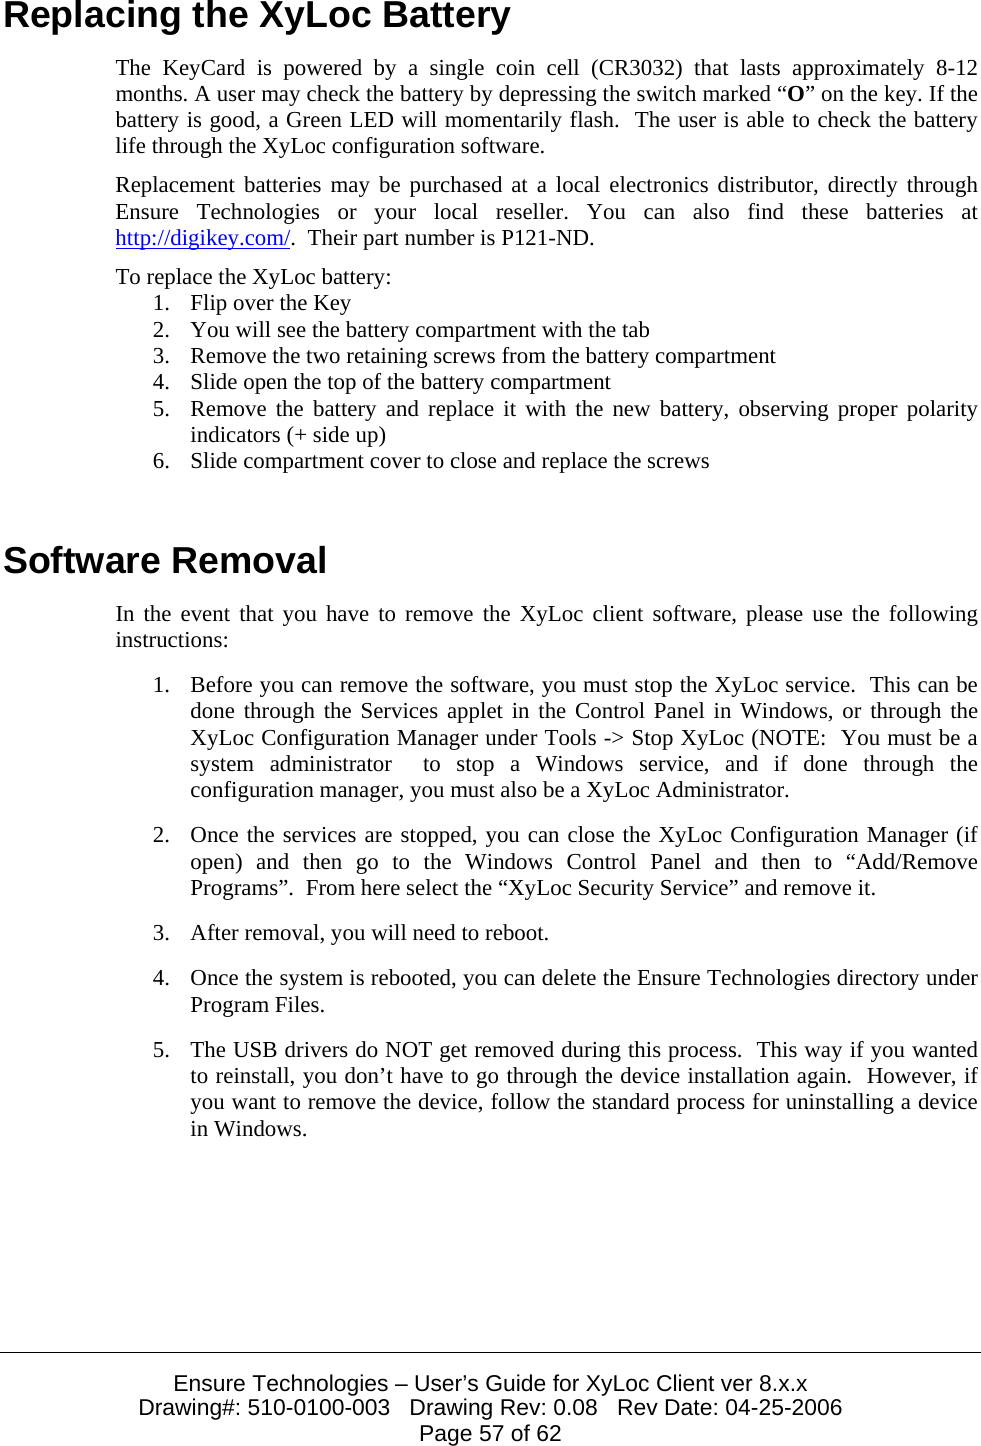  Ensure Technologies – User’s Guide for XyLoc Client ver 8.x.x Drawing#: 510-0100-003   Drawing Rev: 0.08   Rev Date: 04-25-2006 Page 57 of 62 Replacing the XyLoc Battery The KeyCard is powered by a single coin cell (CR3032) that lasts approximately 8-12 months. A user may check the battery by depressing the switch marked “O” on the key. If the battery is good, a Green LED will momentarily flash.  The user is able to check the battery life through the XyLoc configuration software. Replacement batteries may be purchased at a local electronics distributor, directly through Ensure Technologies or your local reseller. You can also find these batteries at http://digikey.com/.  Their part number is P121-ND. To replace the XyLoc battery: 1. Flip over the Key  2. You will see the battery compartment with the tab  3. Remove the two retaining screws from the battery compartment 4. Slide open the top of the battery compartment 5. Remove the battery and replace it with the new battery, observing proper polarity indicators (+ side up) 6. Slide compartment cover to close and replace the screws  Software Removal In the event that you have to remove the XyLoc client software, please use the following instructions: 1. Before you can remove the software, you must stop the XyLoc service.  This can be done through the Services applet in the Control Panel in Windows, or through the XyLoc Configuration Manager under Tools -&gt; Stop XyLoc (NOTE:  You must be a system administrator  to stop a Windows service, and if done through the configuration manager, you must also be a XyLoc Administrator. 2. Once the services are stopped, you can close the XyLoc Configuration Manager (if open) and then go to the Windows Control Panel and then to “Add/Remove Programs”.  From here select the “XyLoc Security Service” and remove it. 3. After removal, you will need to reboot. 4. Once the system is rebooted, you can delete the Ensure Technologies directory under Program Files. 5. The USB drivers do NOT get removed during this process.  This way if you wanted to reinstall, you don’t have to go through the device installation again.  However, if you want to remove the device, follow the standard process for uninstalling a device in Windows. 